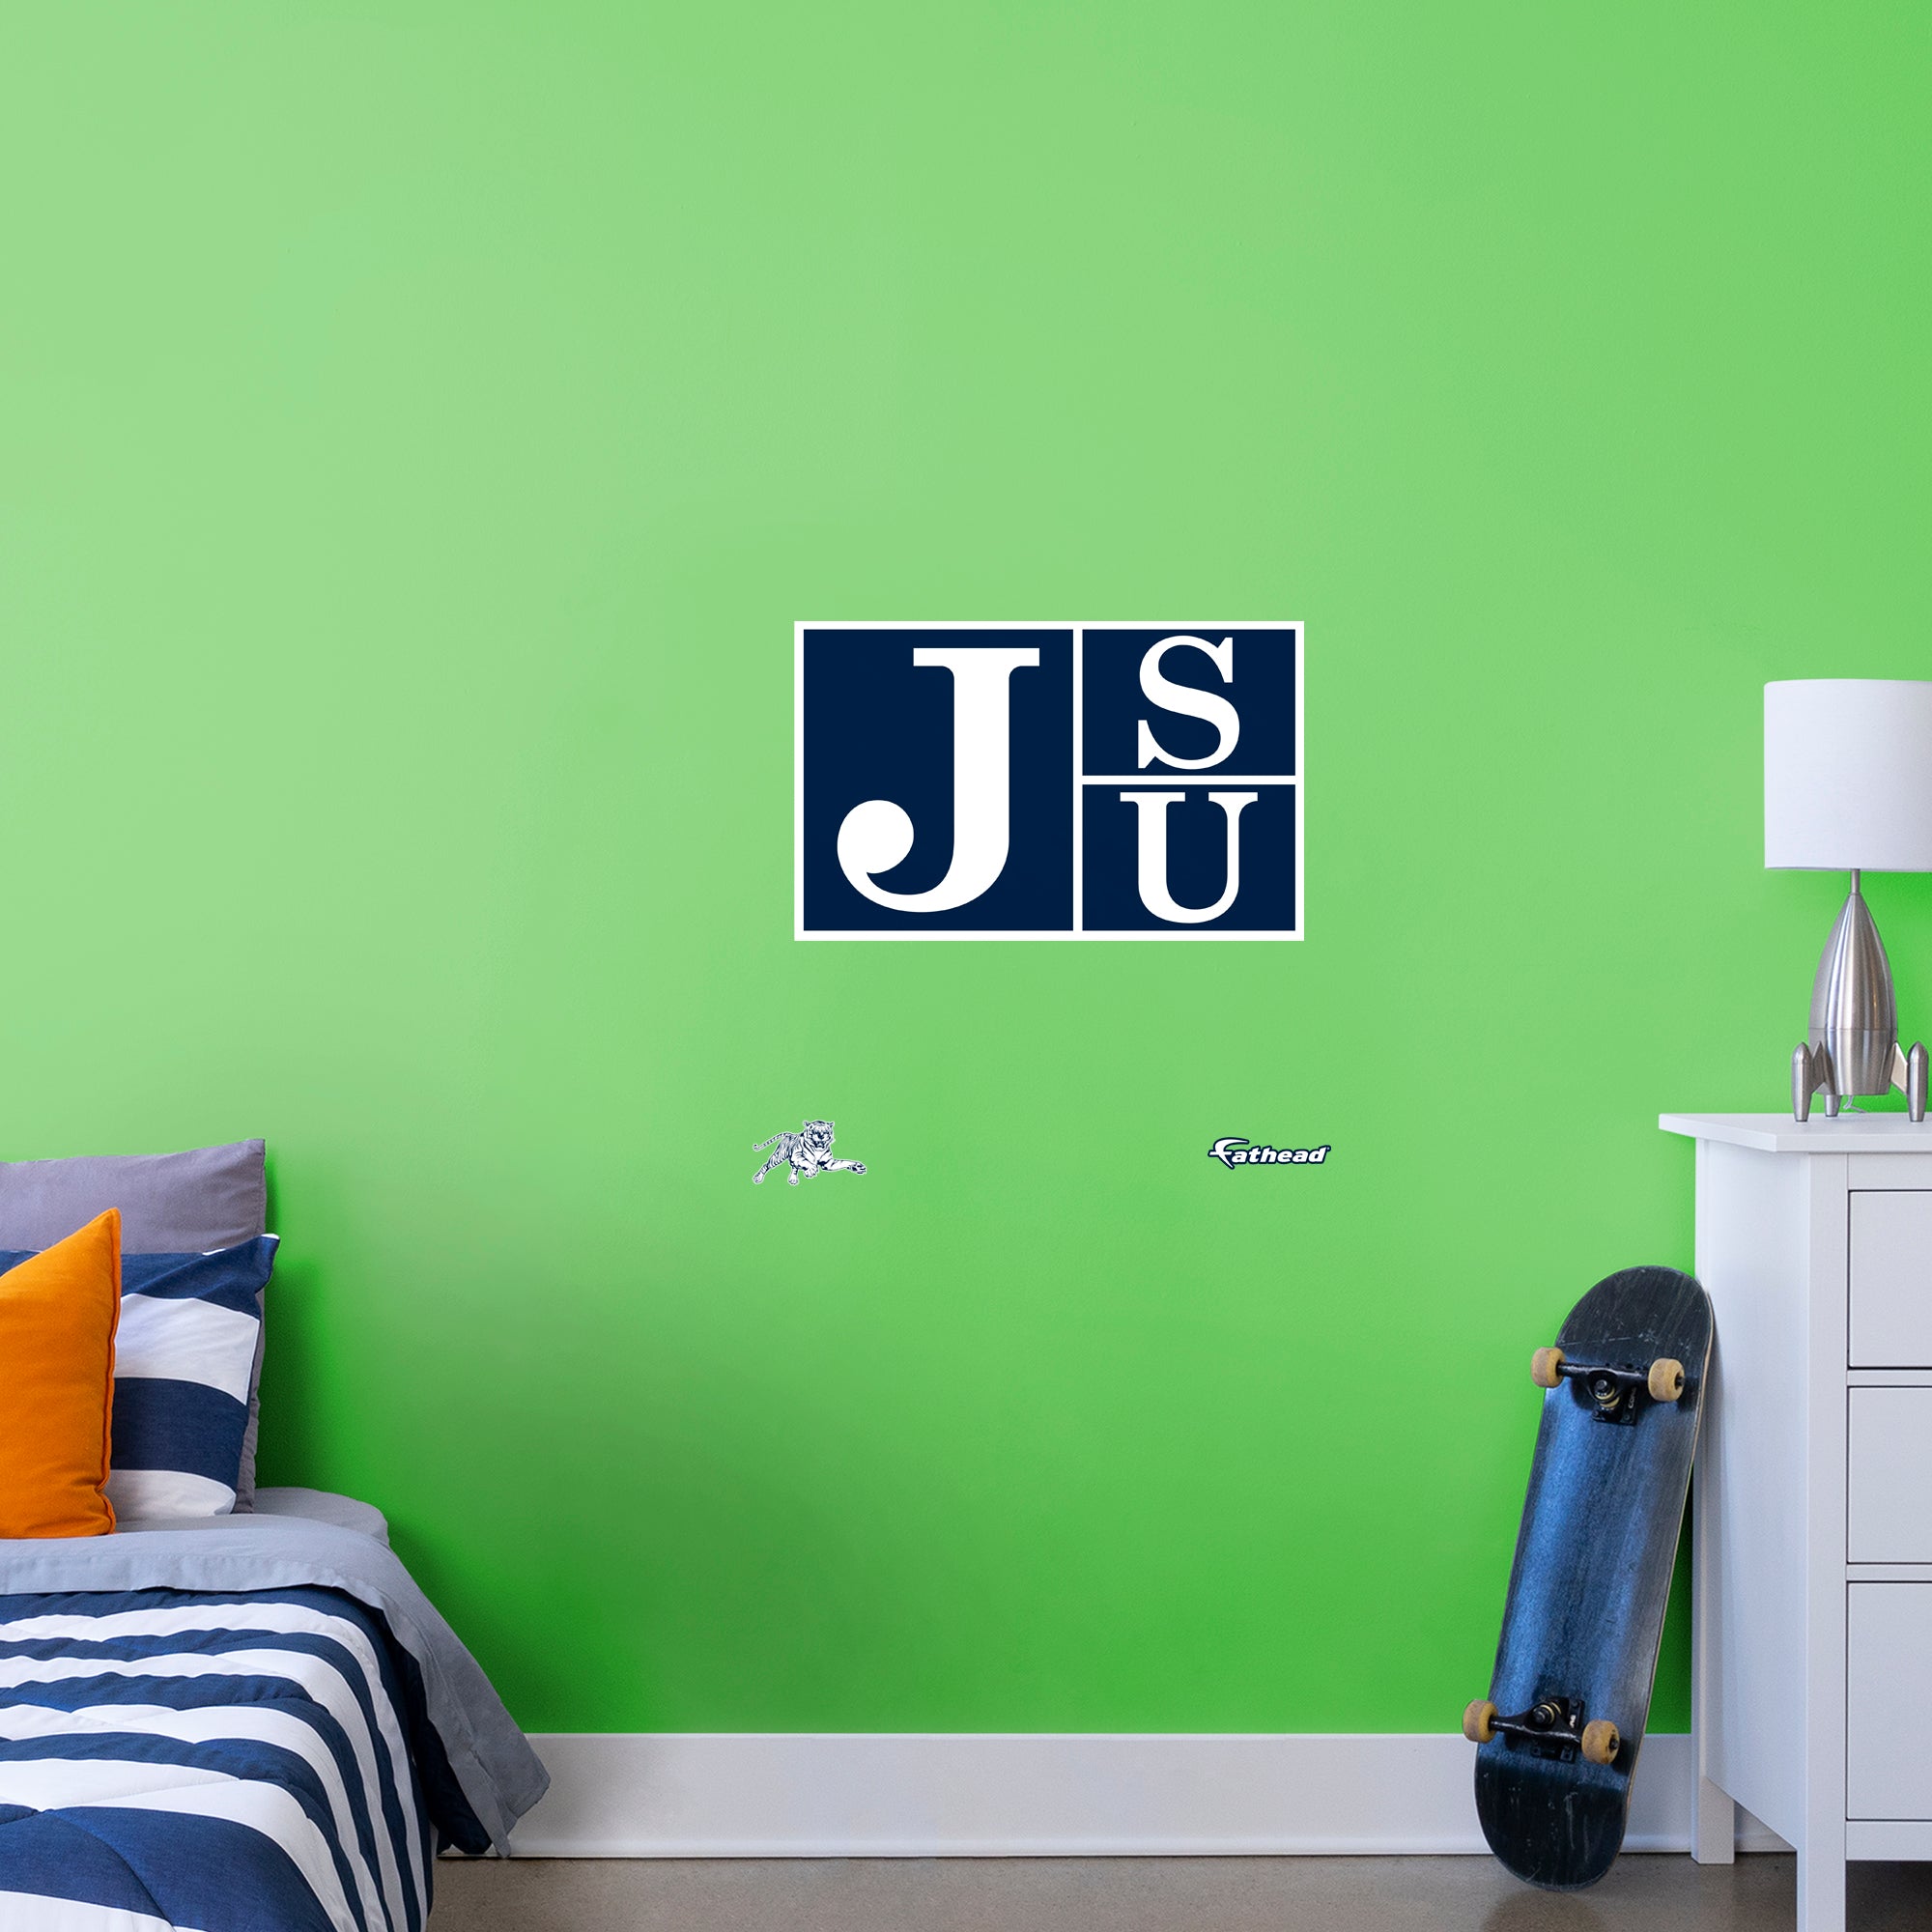 Jackson State University 2020 Logo - Officially Licensed NCAA Removable Wall Decal XL by Fathead | Vinyl